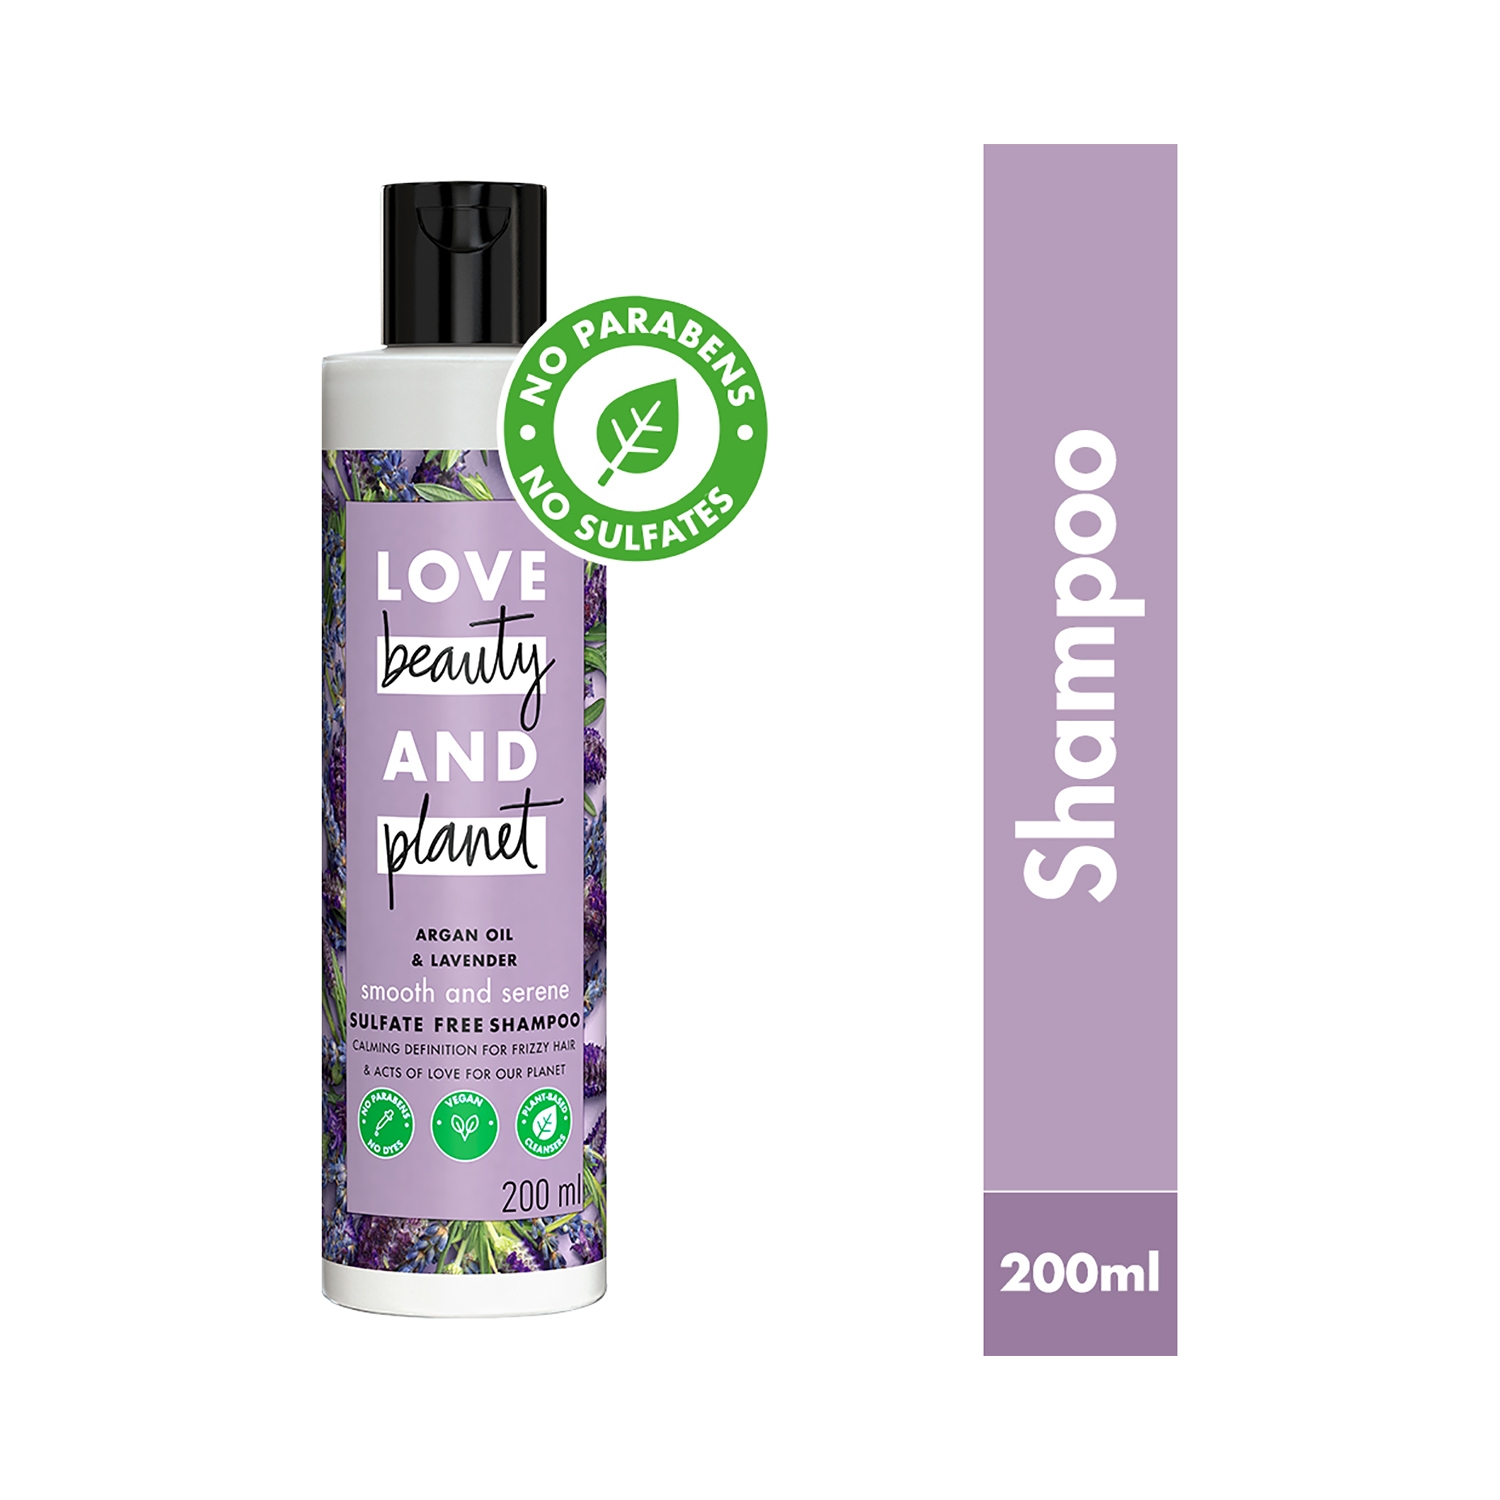 Love Beauty & Planet | Love Beauty & Planet Argan Oil and Lavender Smooth and Serene Shampoo (200ml)